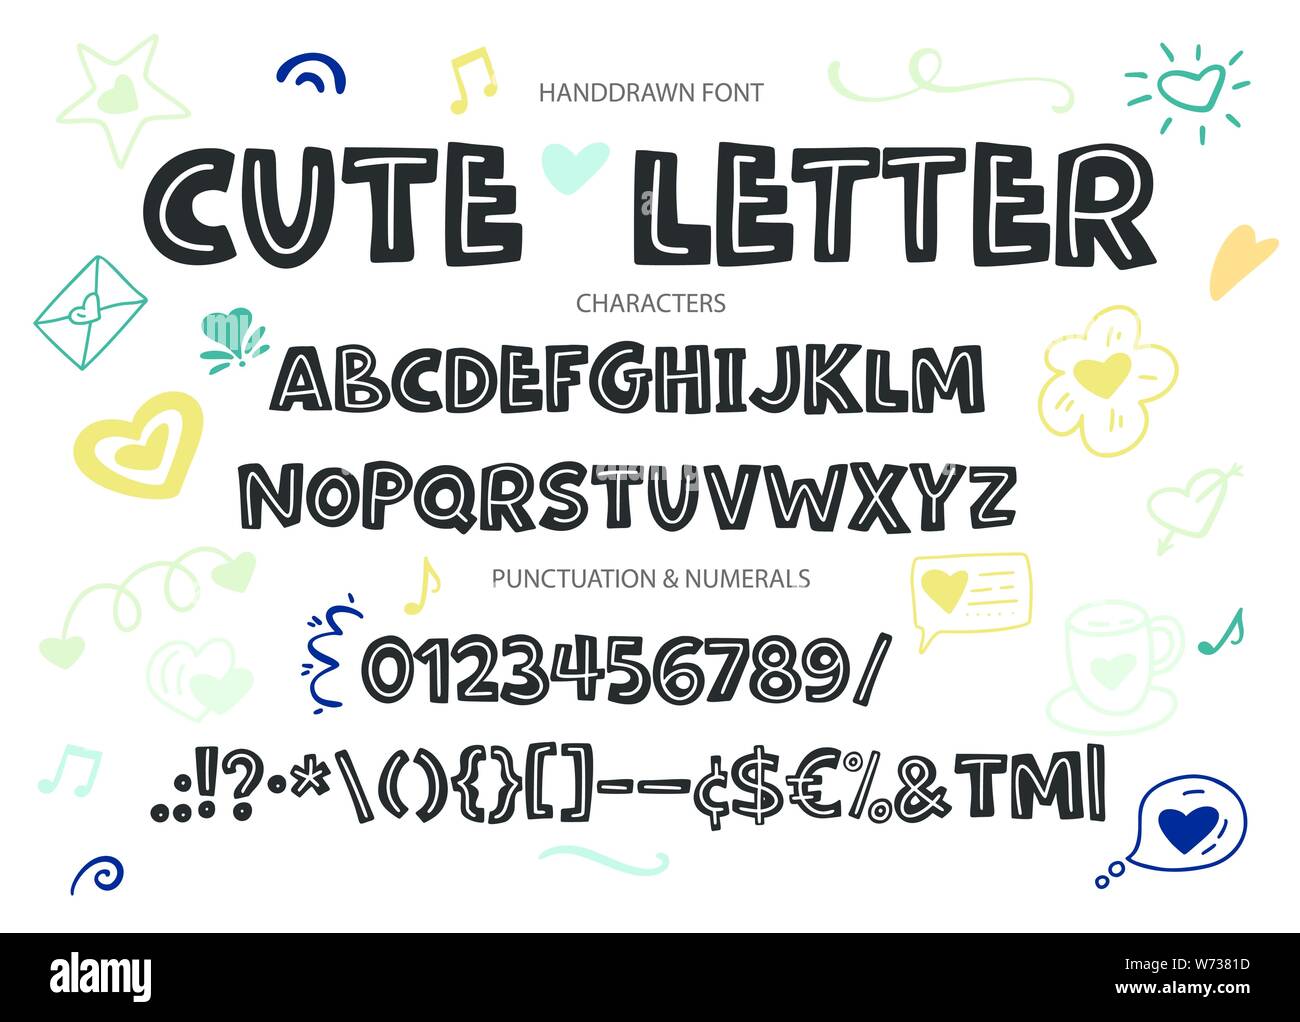 Cute hand drawn love display vector alphabet ABC font with letters ...